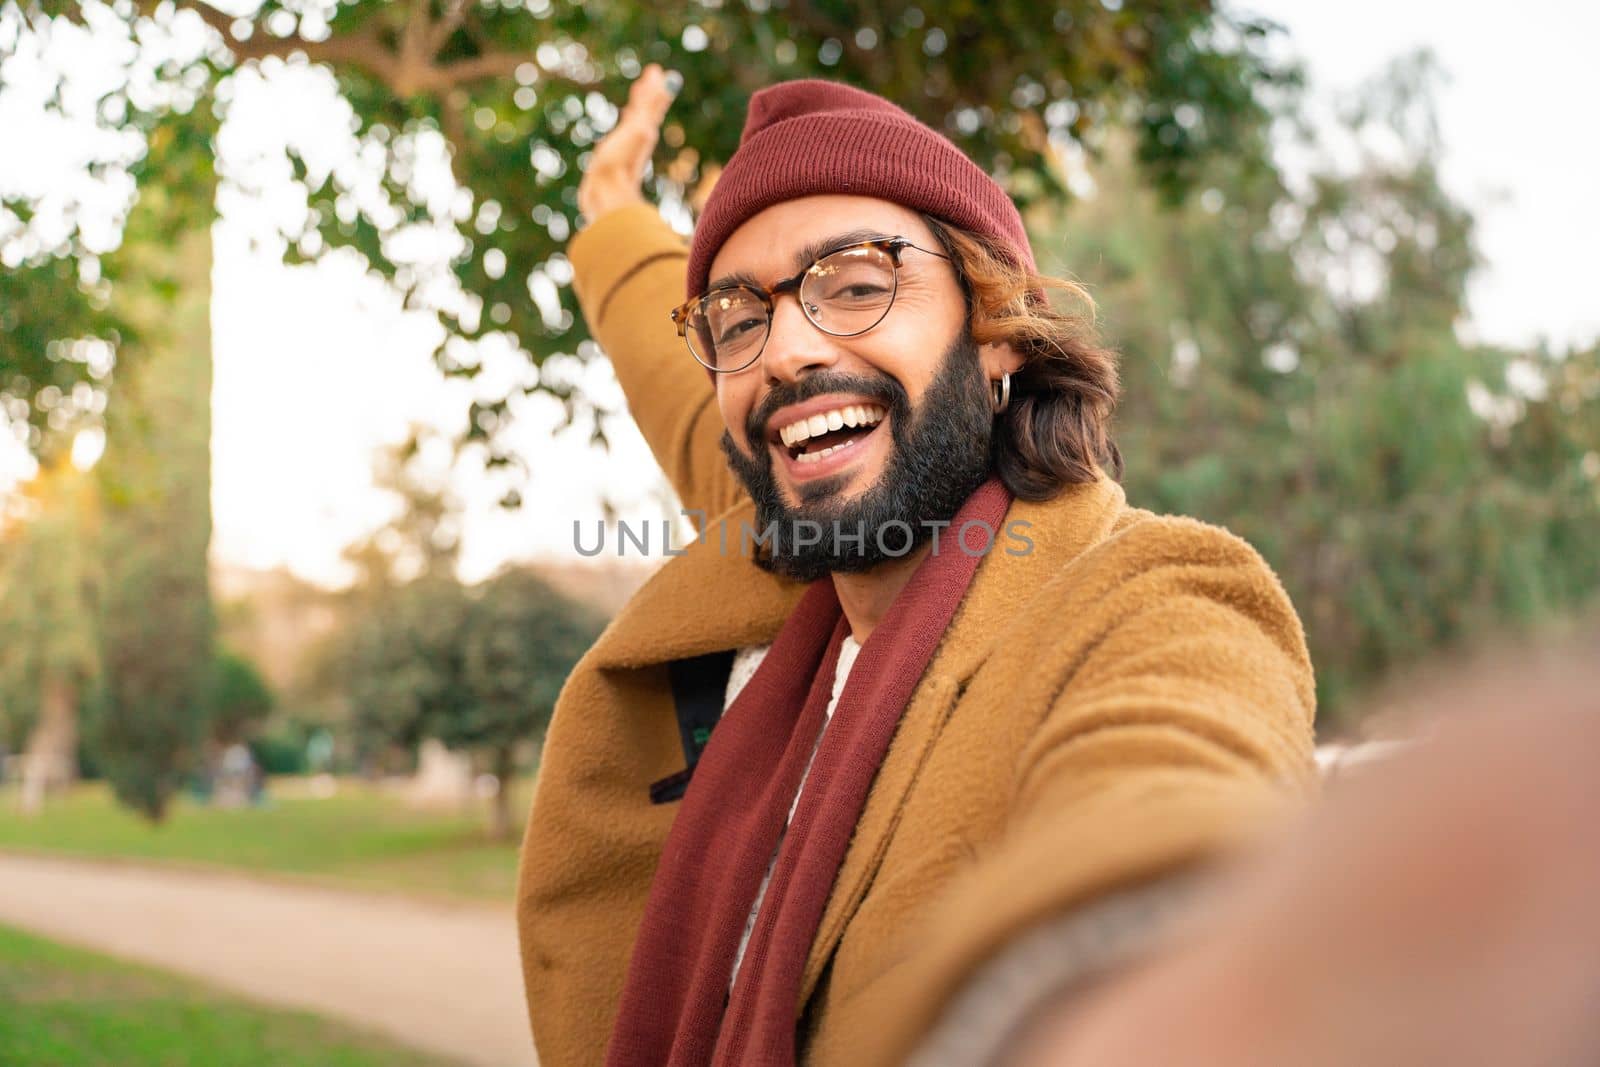 Happy young caucasian man with glasses and beard taking a selfie outdoors in the park in winter. by PaulCarr